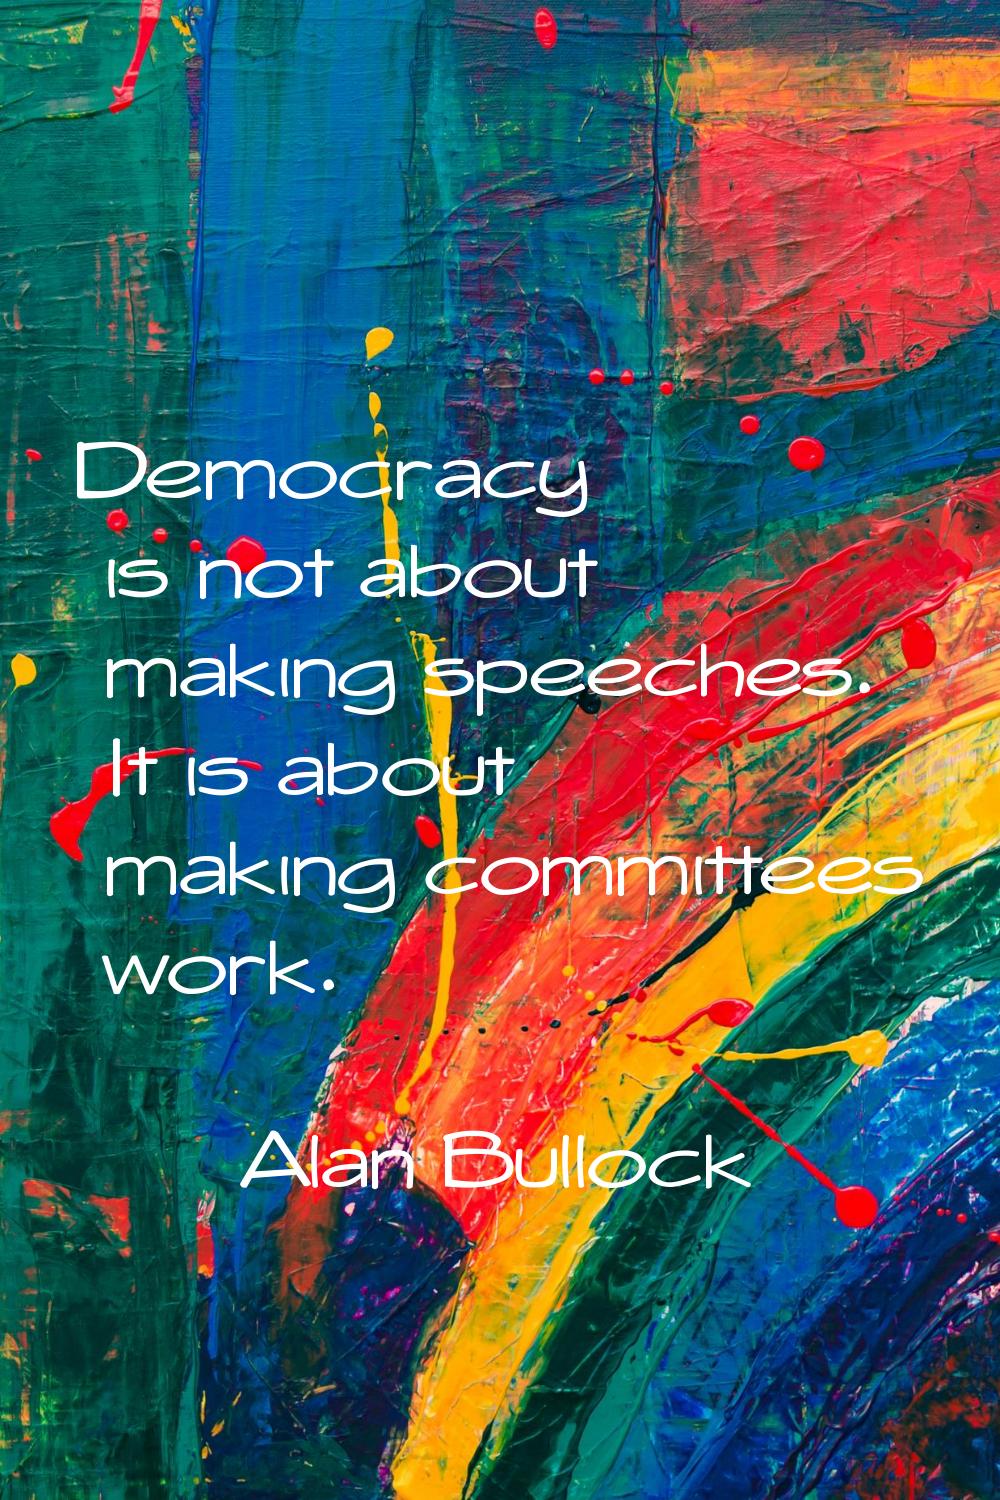 Democracy is not about making speeches. It is about making committees work.